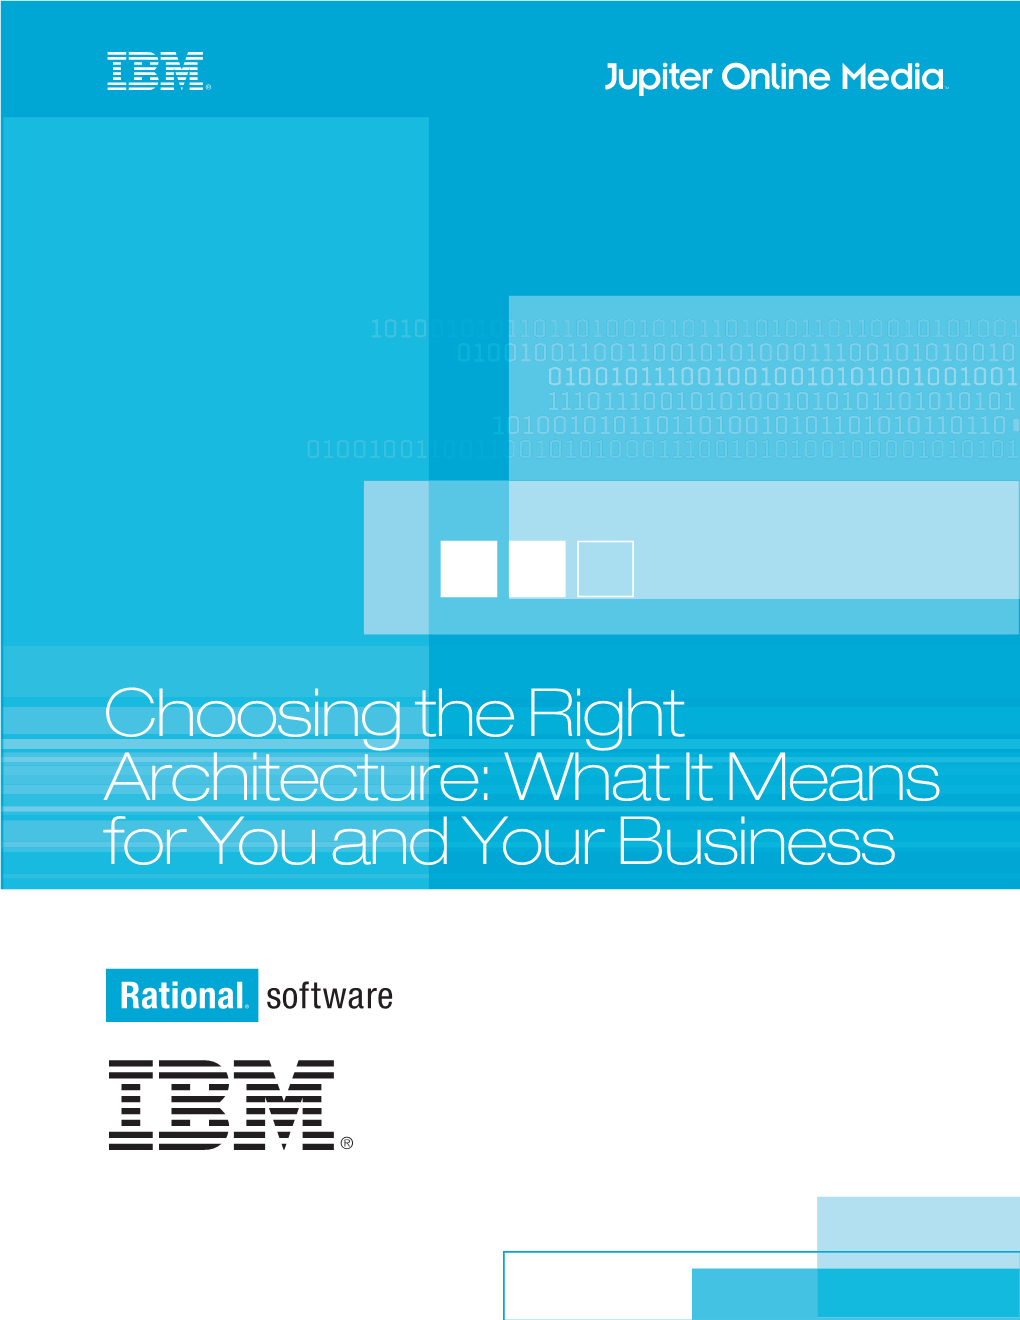 Choosing the Right Architecture: What It Means for You and Your Business Contents